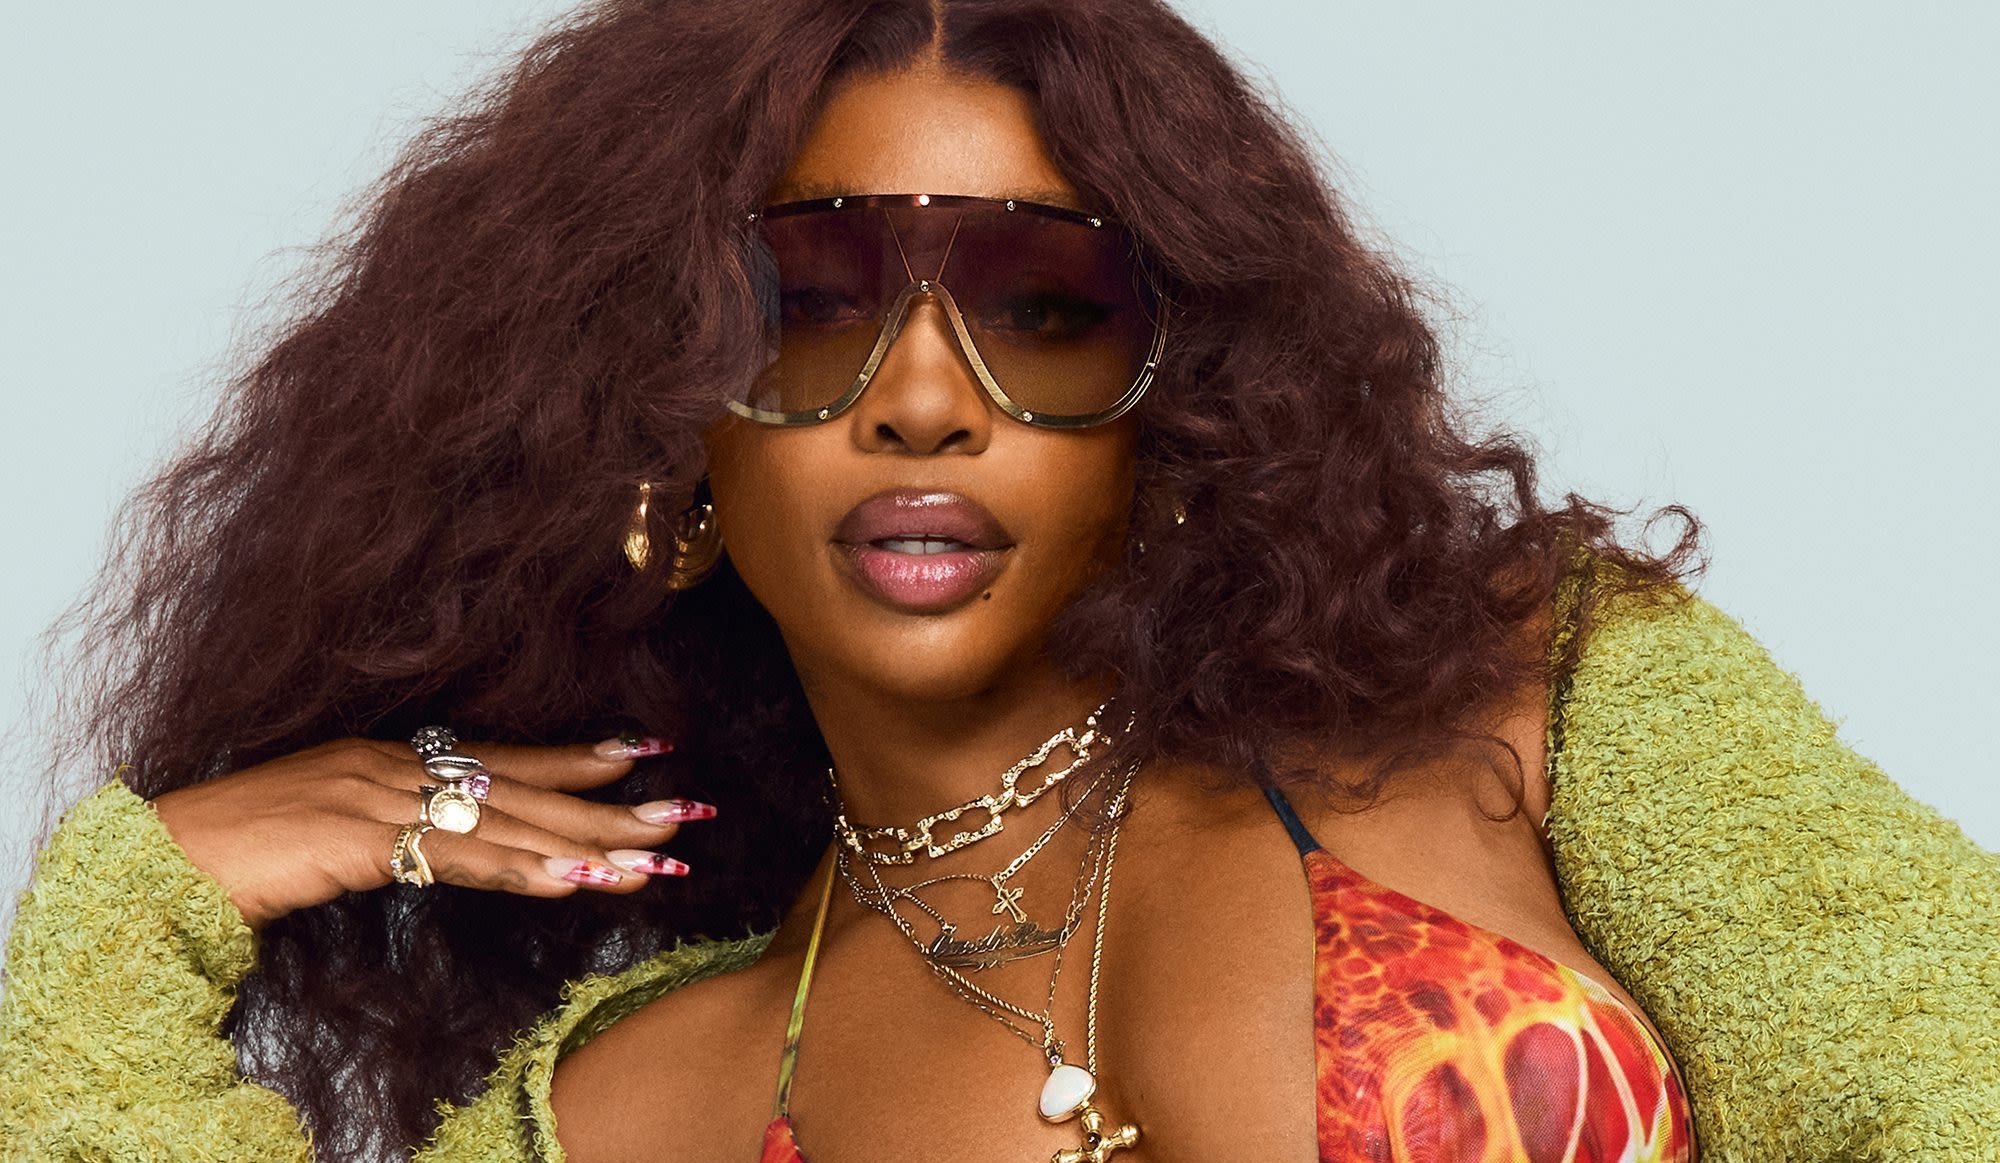 SZA Models Quay’s ‘Playful and Stylish’ Spring Sunglasses, Kicks Off Contest to See Her Concert at Governors Ball